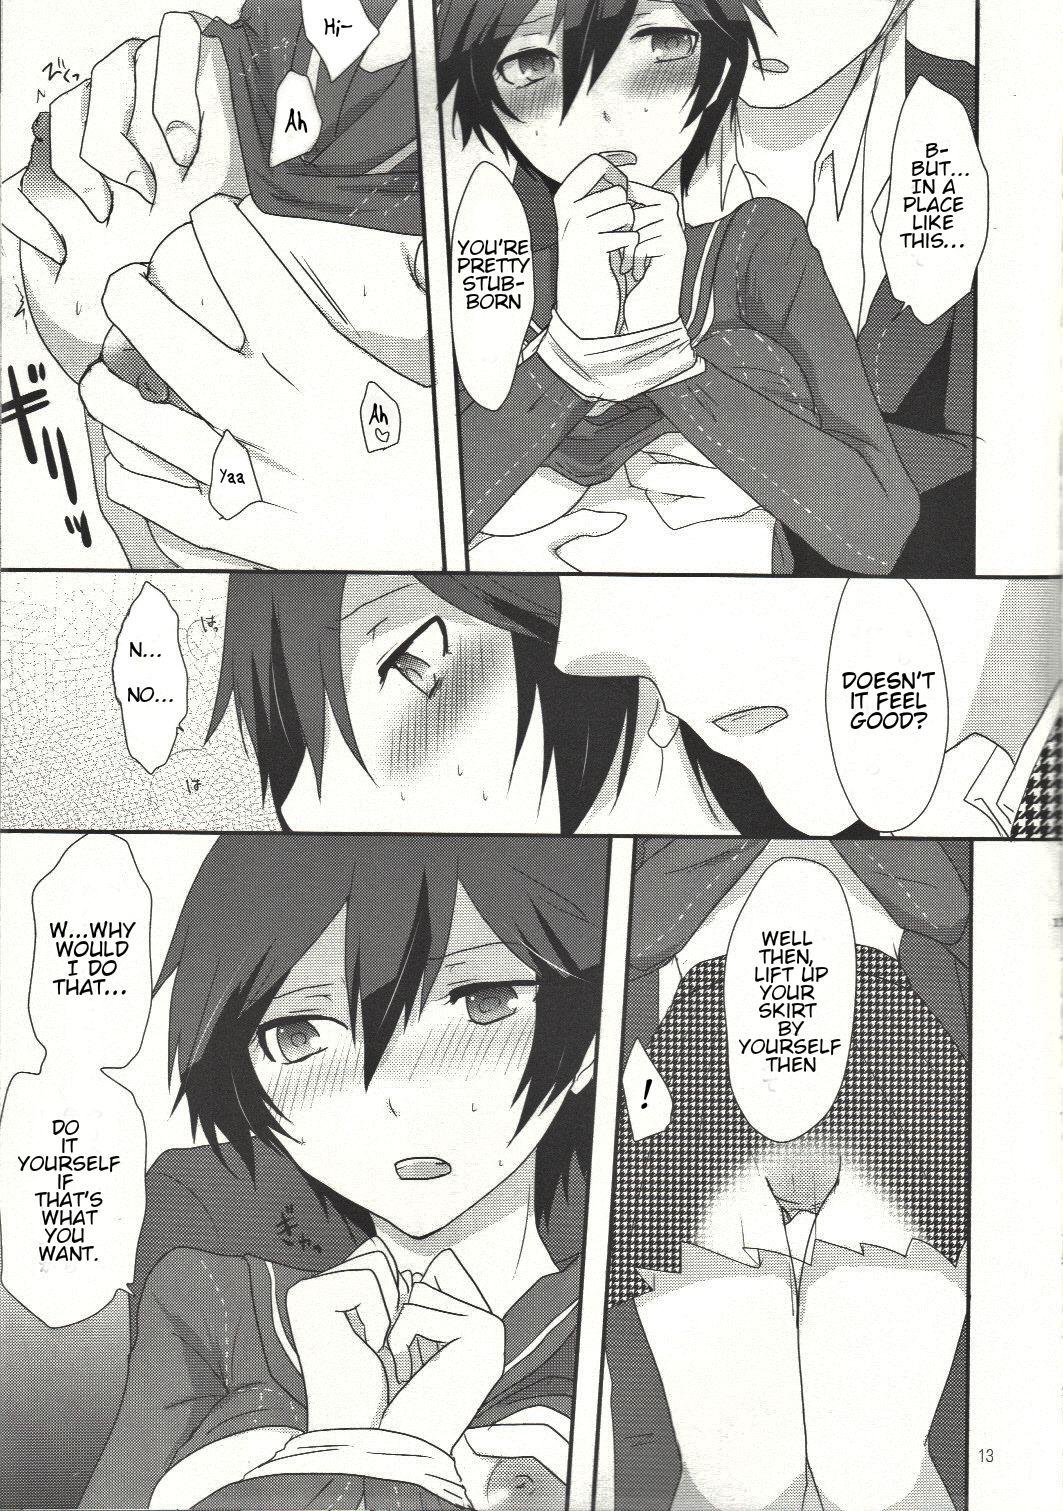 Longhair Love or Lies - Persona 4 Dirty - Page 12